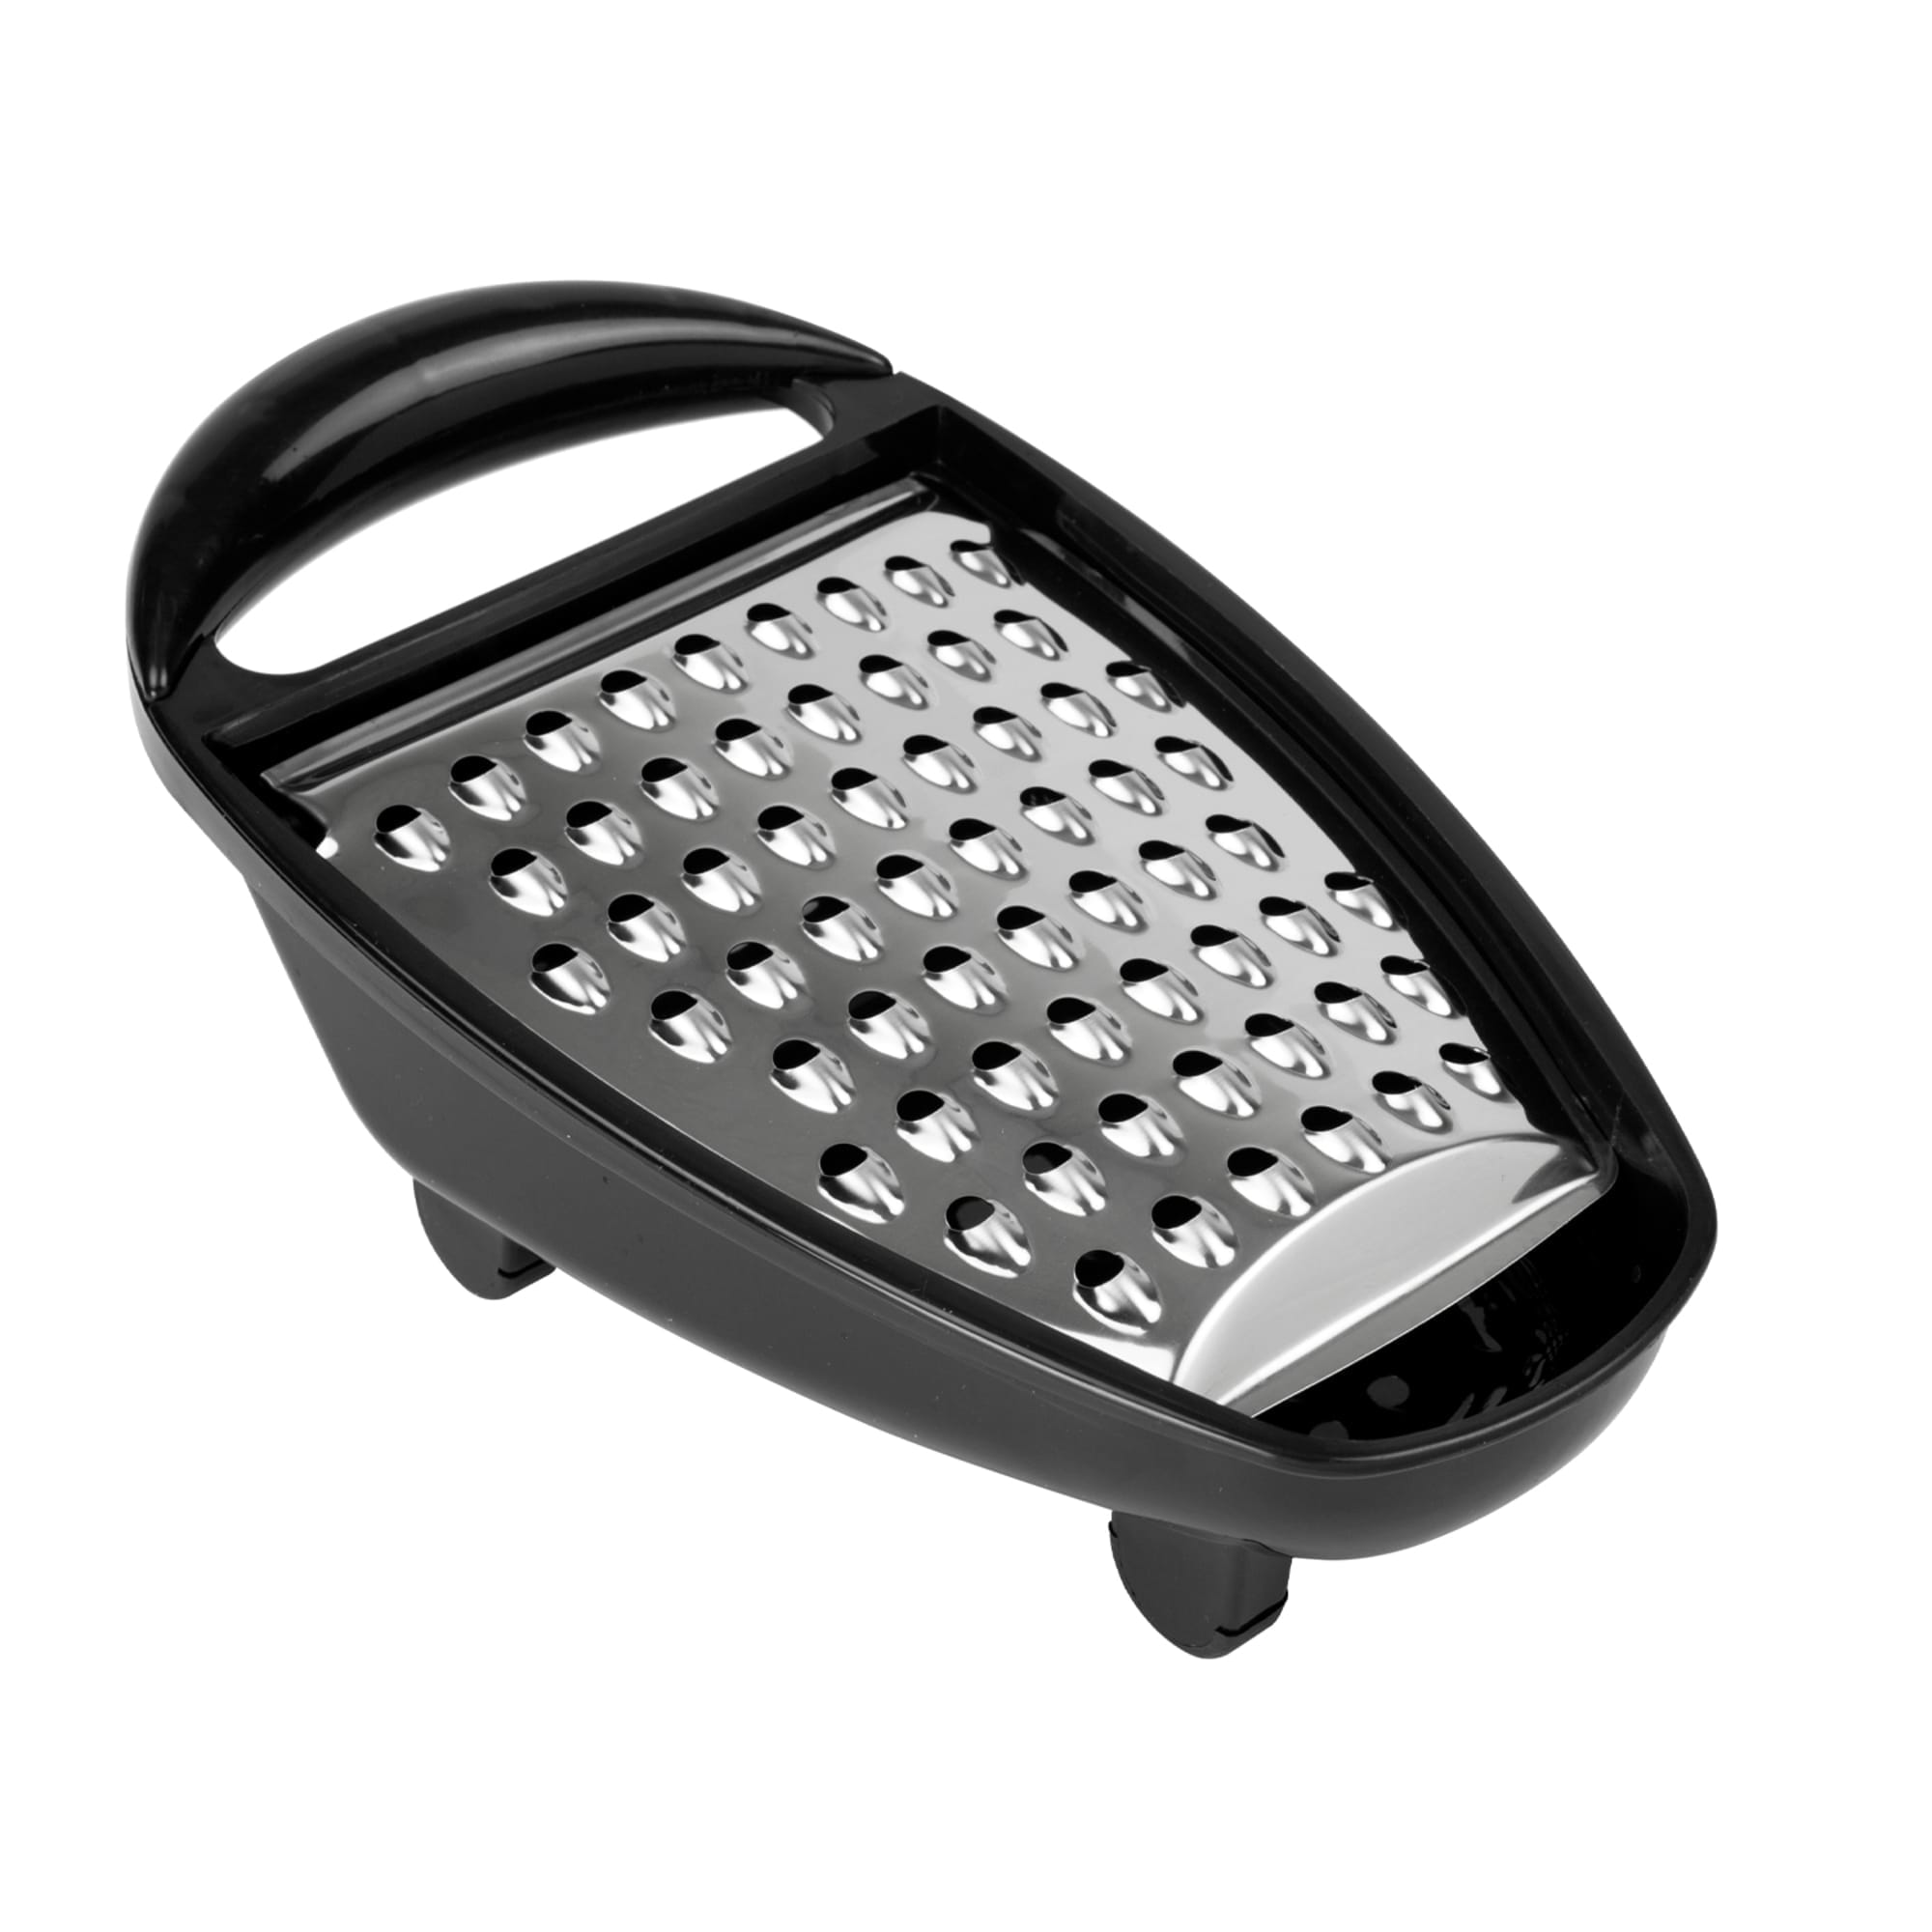 Home Basics Cheese Grater with Catch Tray $3.00 EACH, CASE PACK OF 24